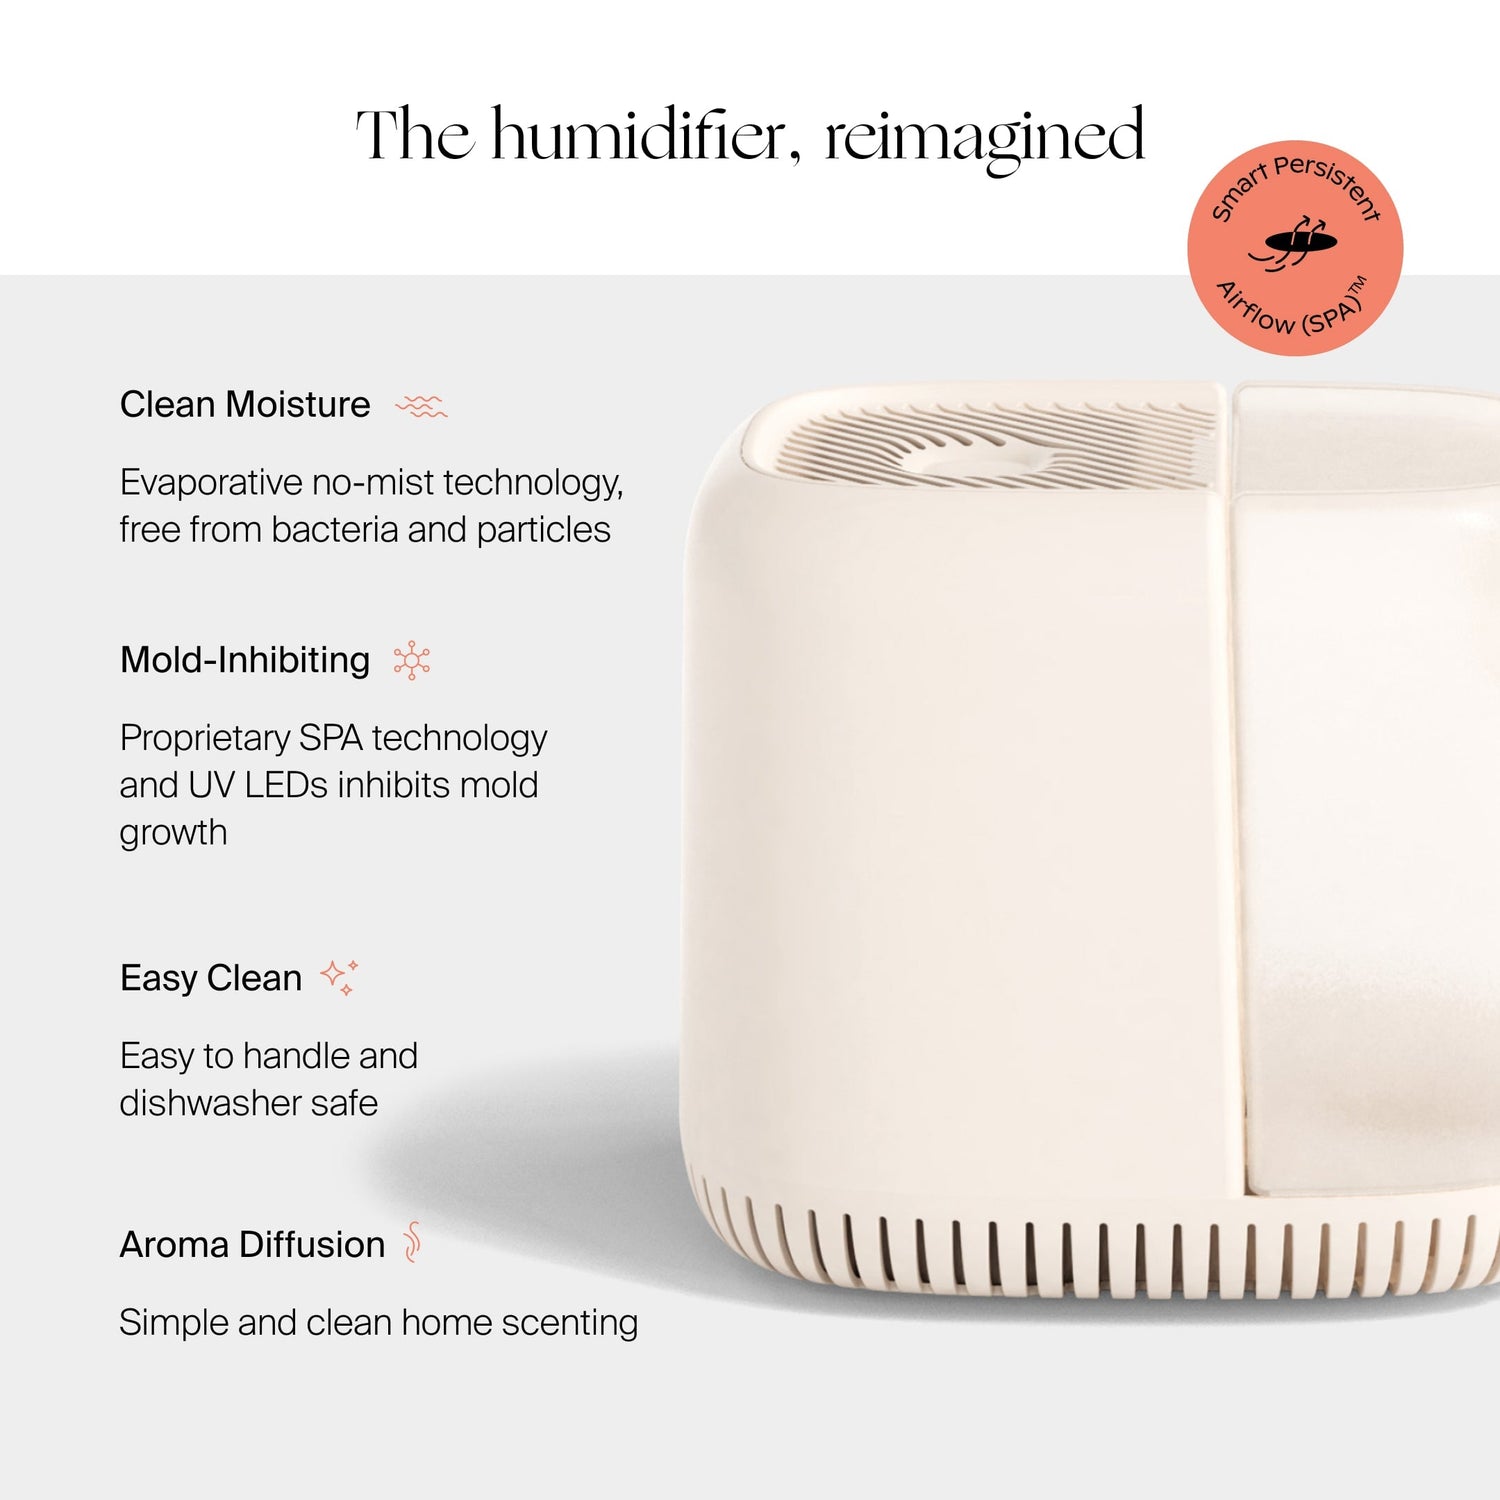 Bedside Humidifier | Lifestyle, the humidifier, reimagined